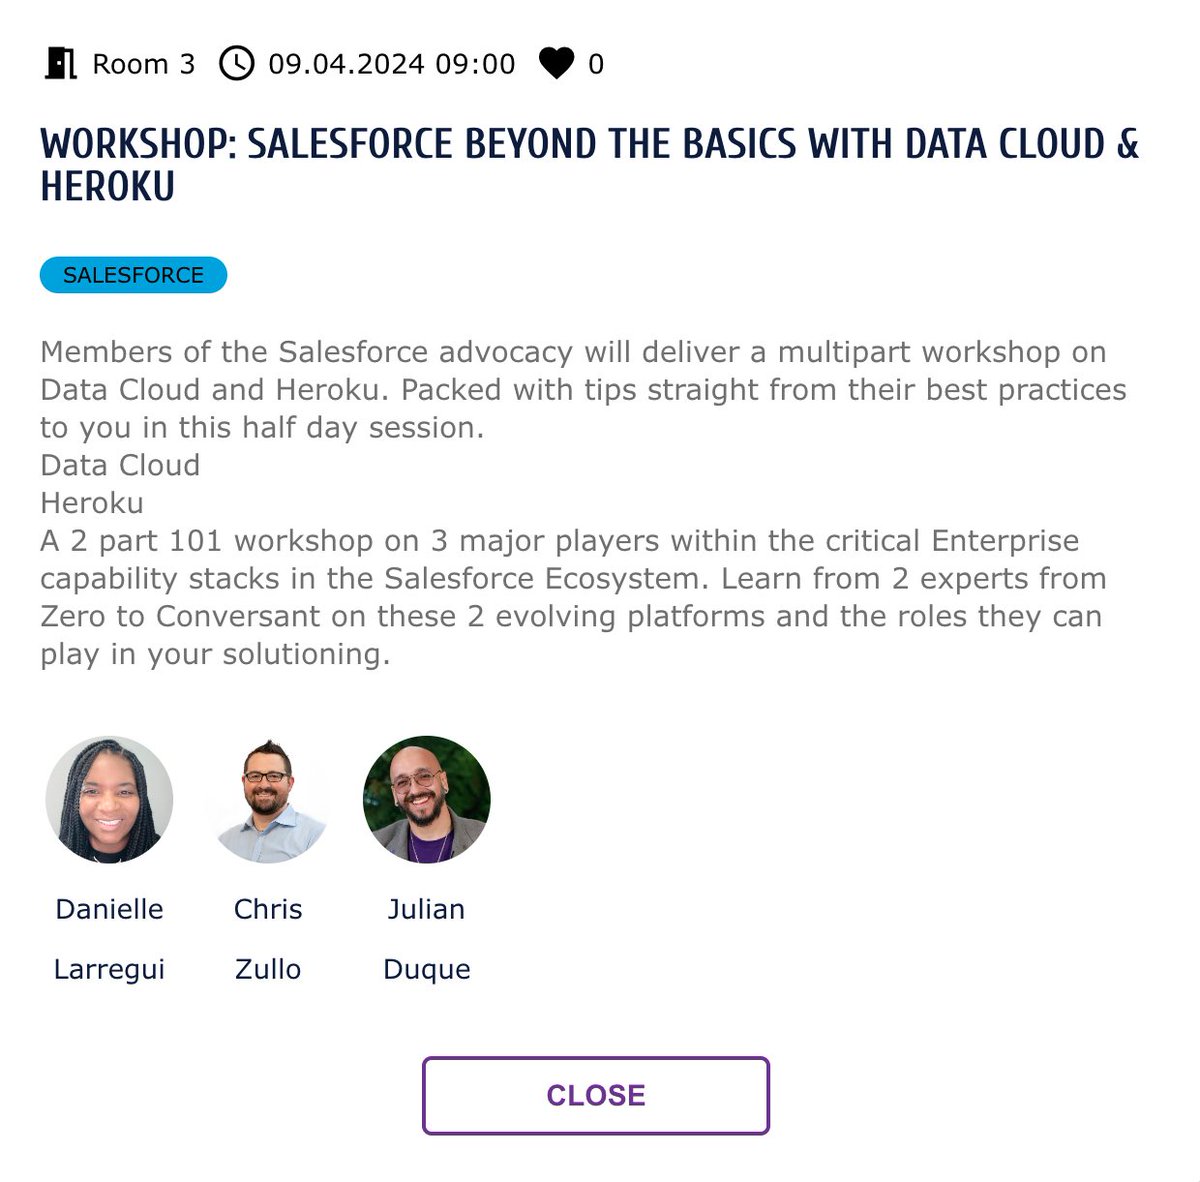 We're headed to the NA Cloud & Collaboration Summit! Join us for a multi-part workshop on Data Cloud and Heroku, led by Salesforce advocacy members, including Heroku Developer Advocate, @julian_duque. Gain tips and best practices straight from experts! ➡️ sforce.co/3UkkV3r